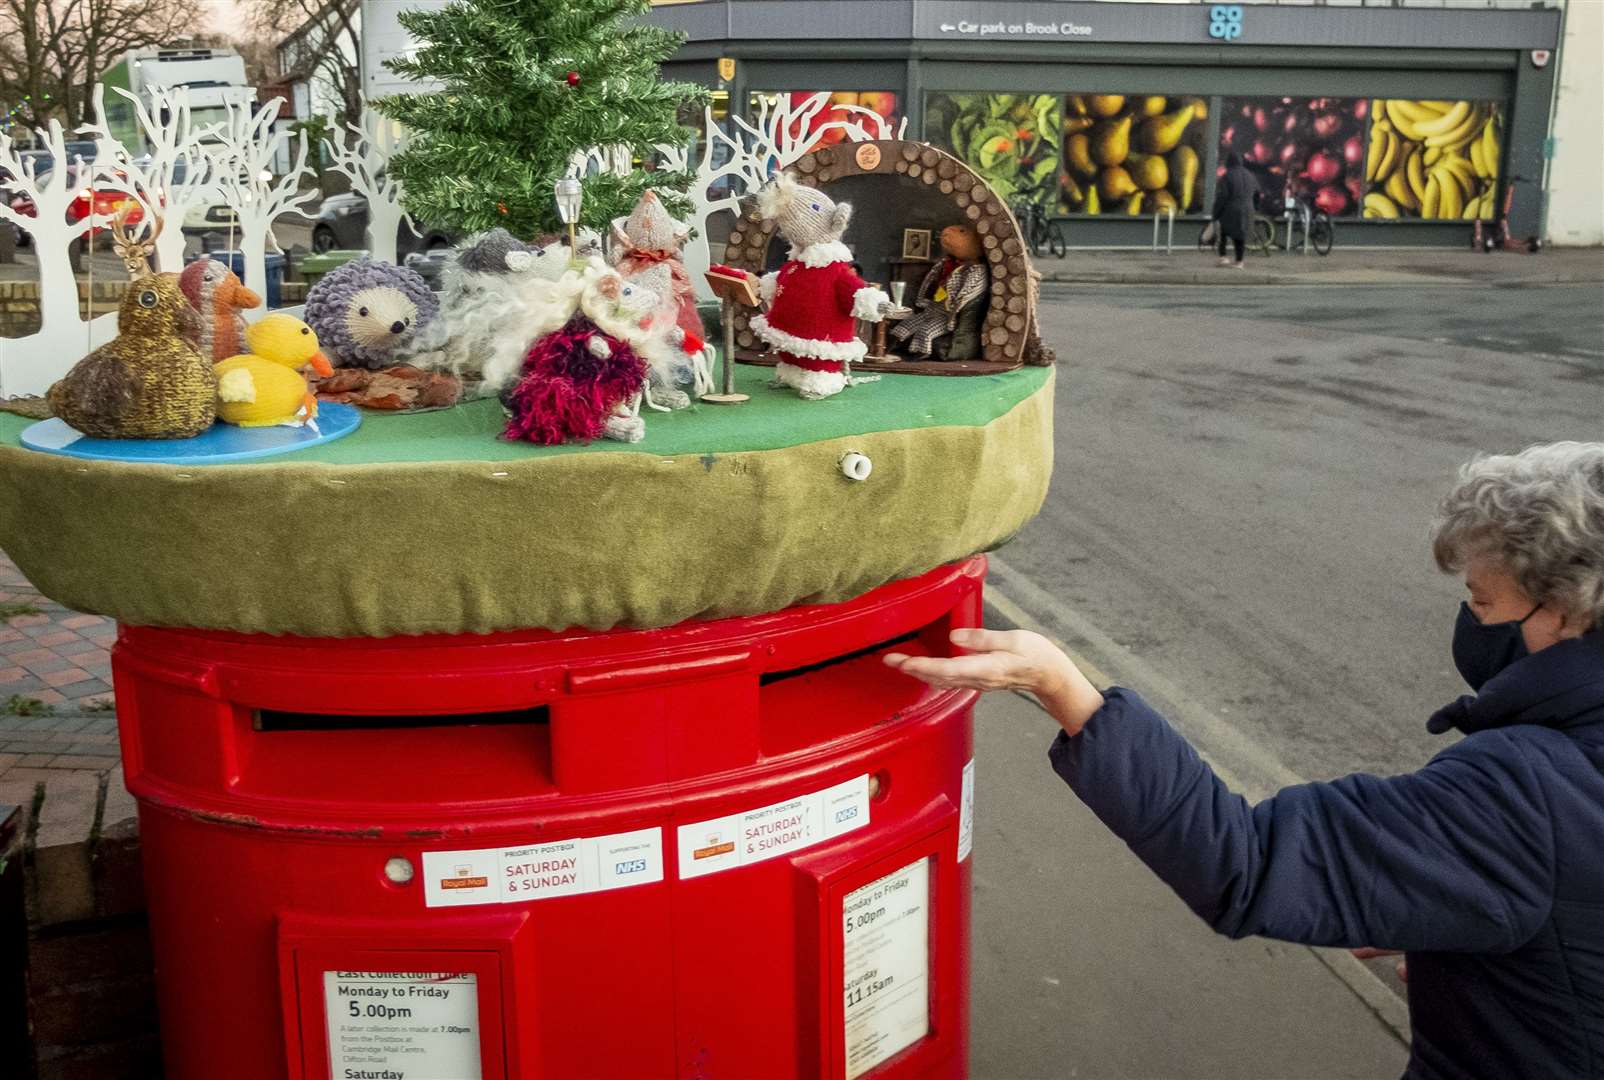 There are fears Christmas deliveries will be affected if strikes continue all the way to December